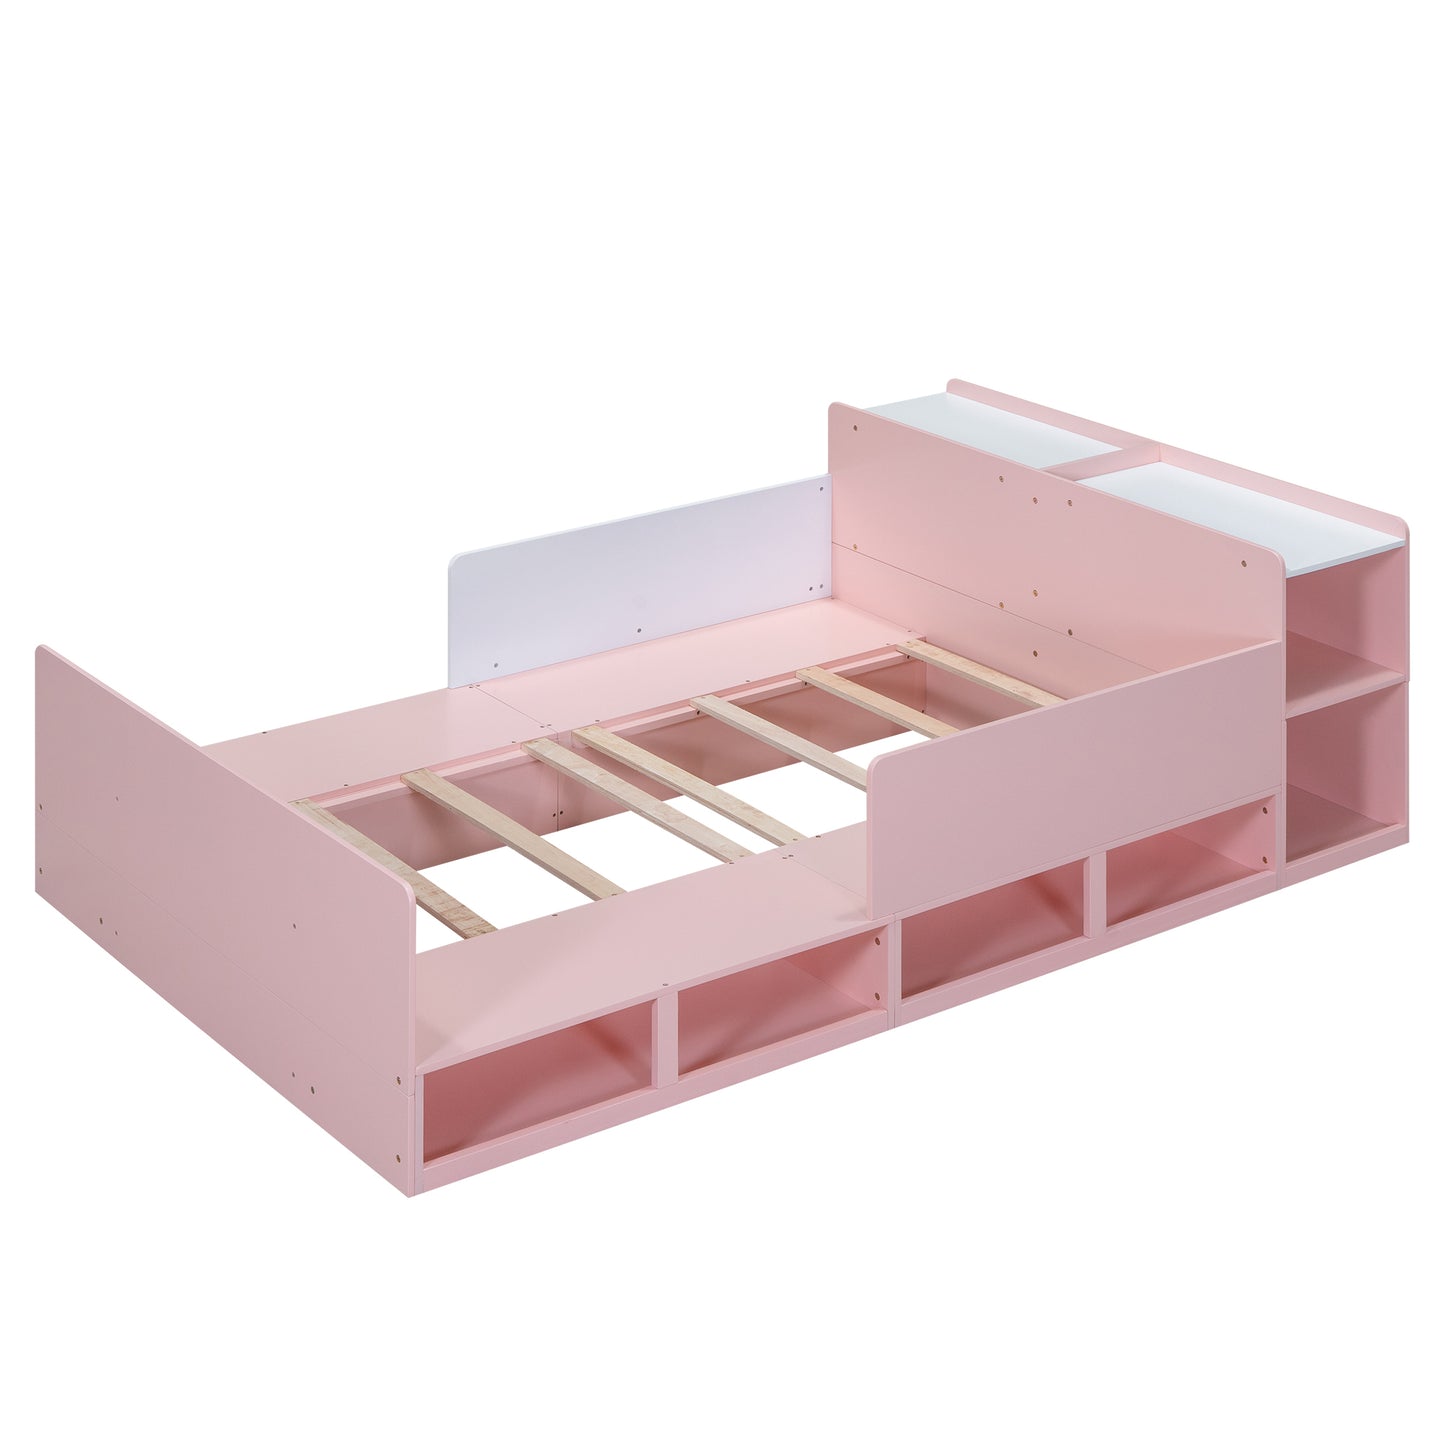 Wood Full Size Platform Bed with Storage Headboard, Guardrails and 4 Underneath Cabinets, Pink